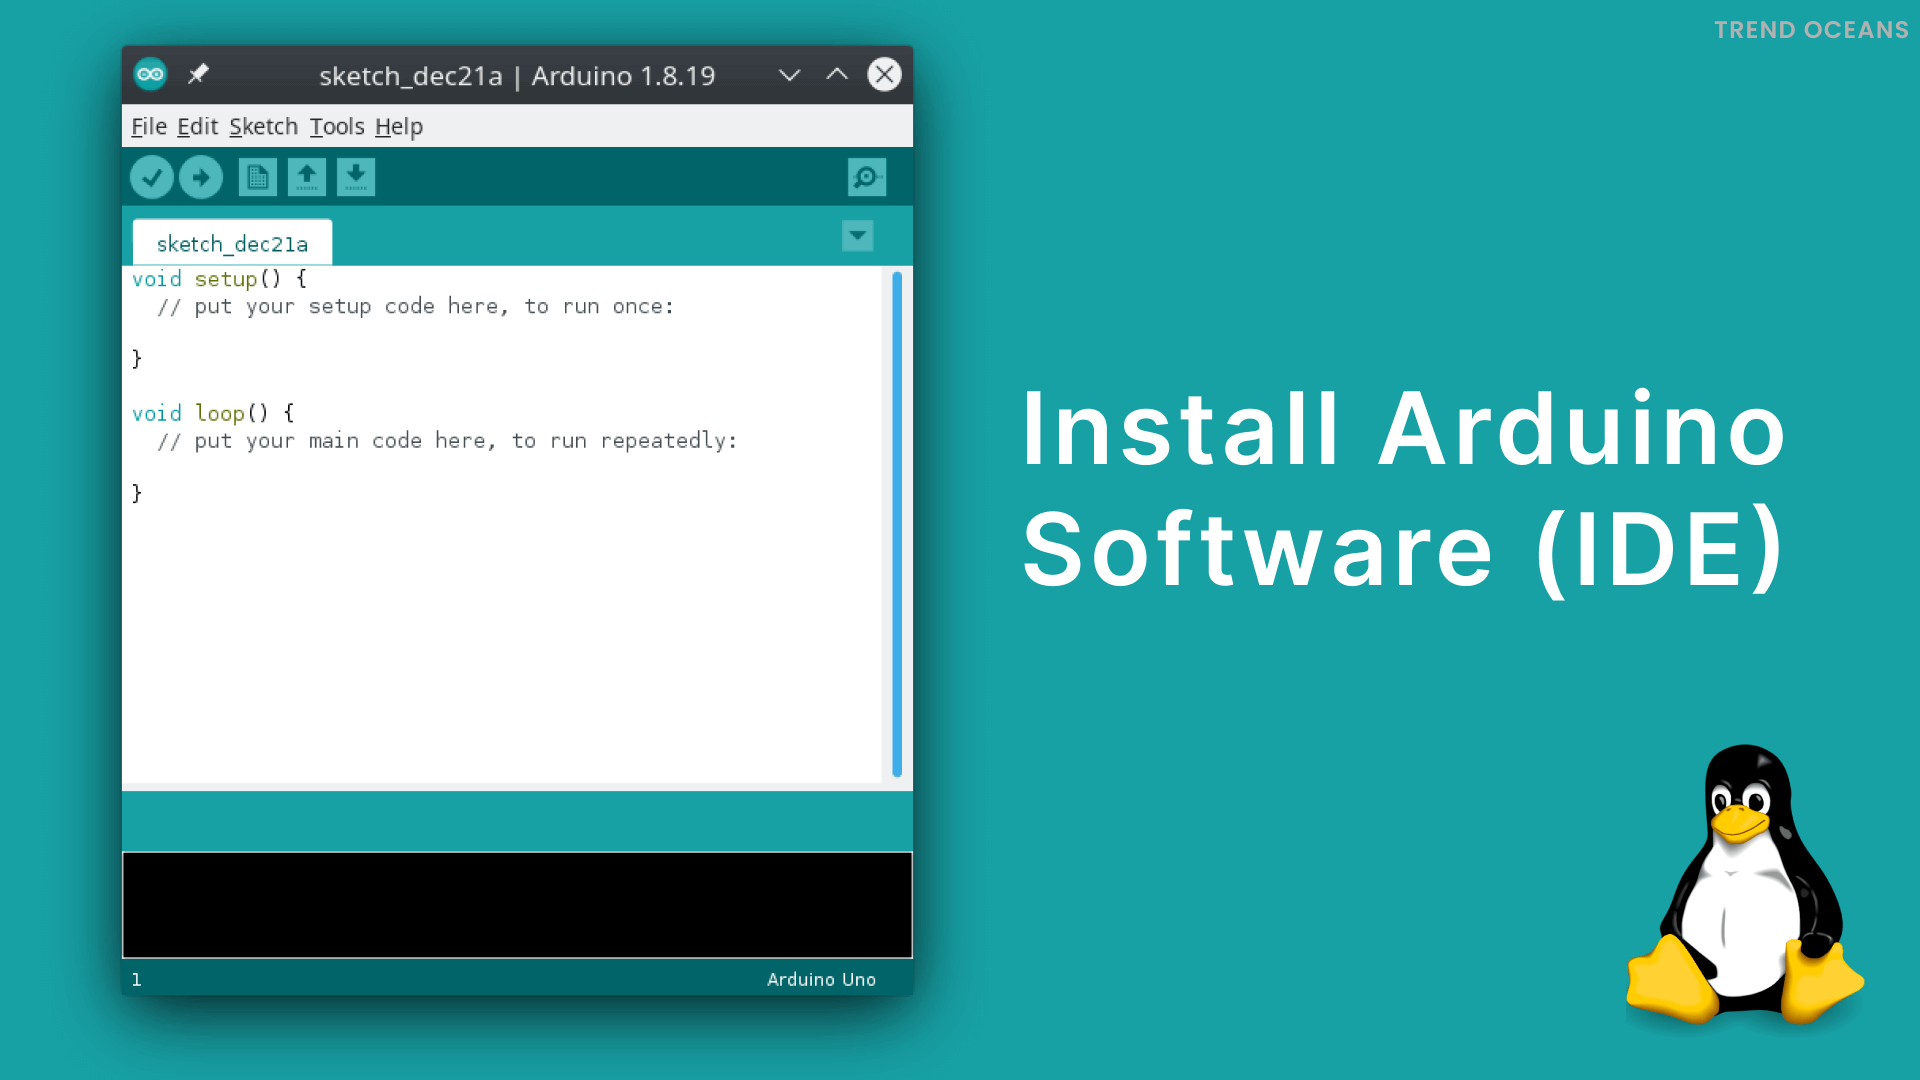 Install Arduino Software (IDE) on Linux